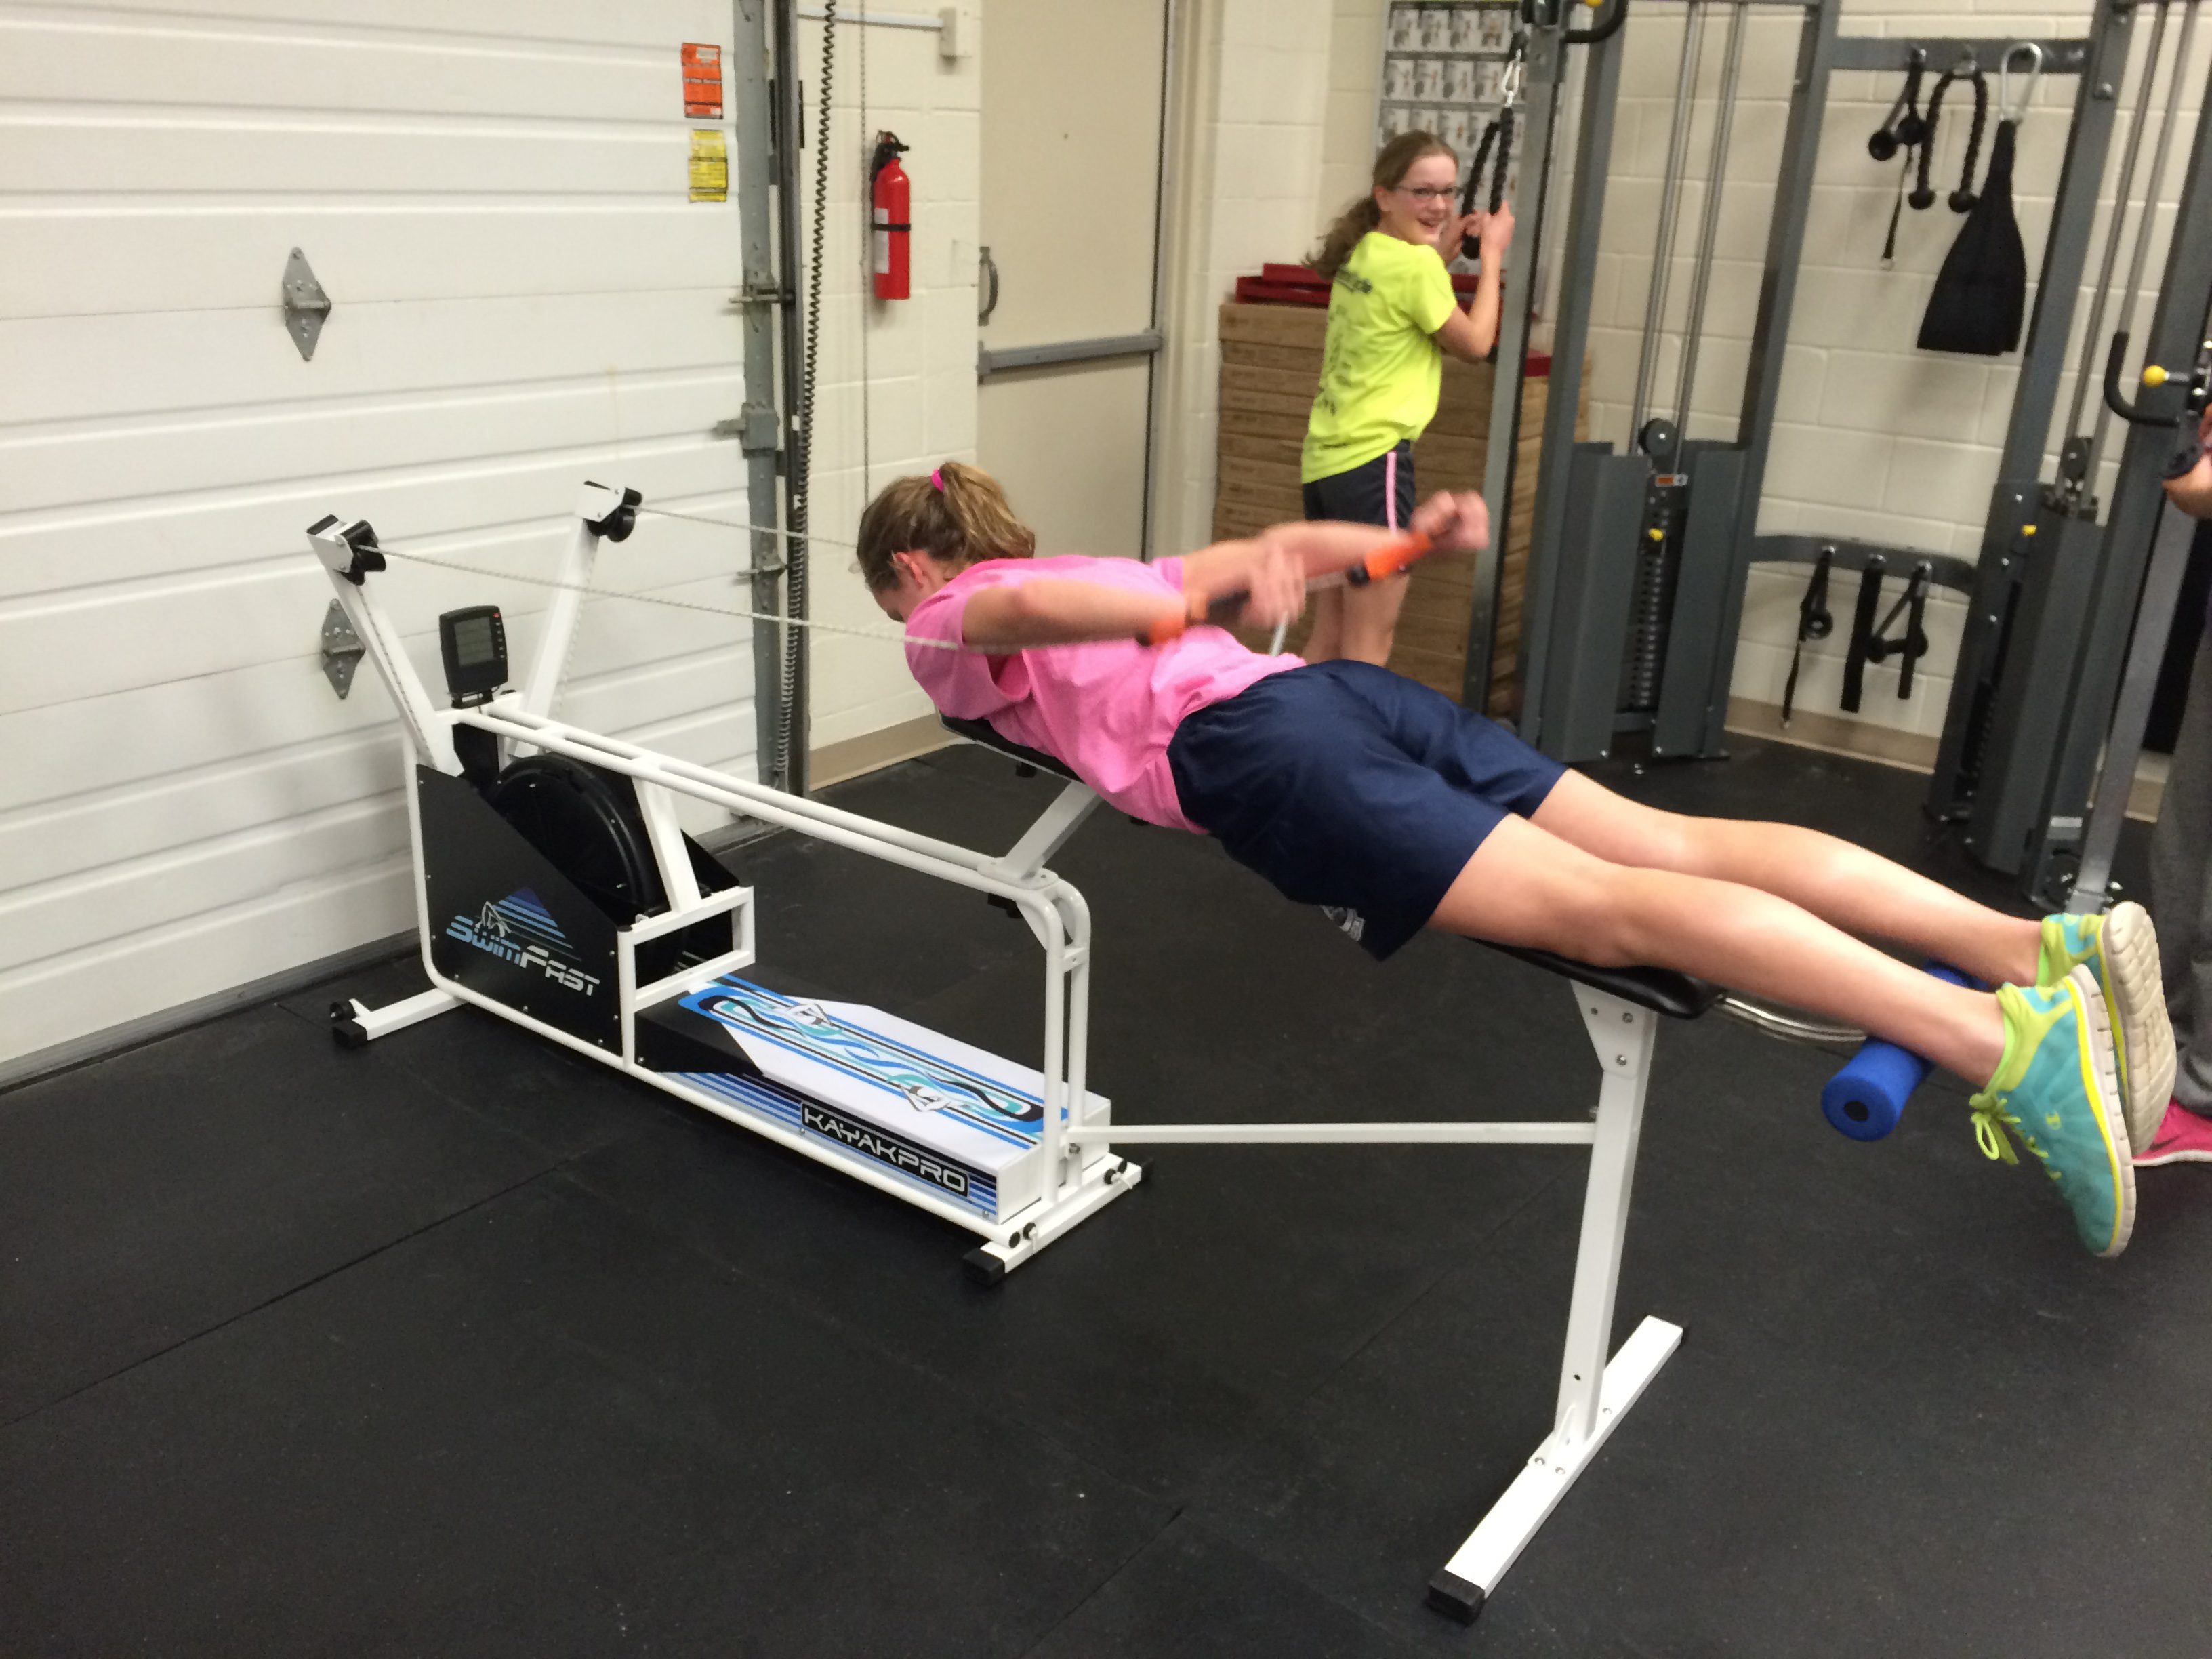 The adjustable bench allows athletes of all sizes to get a workout done.